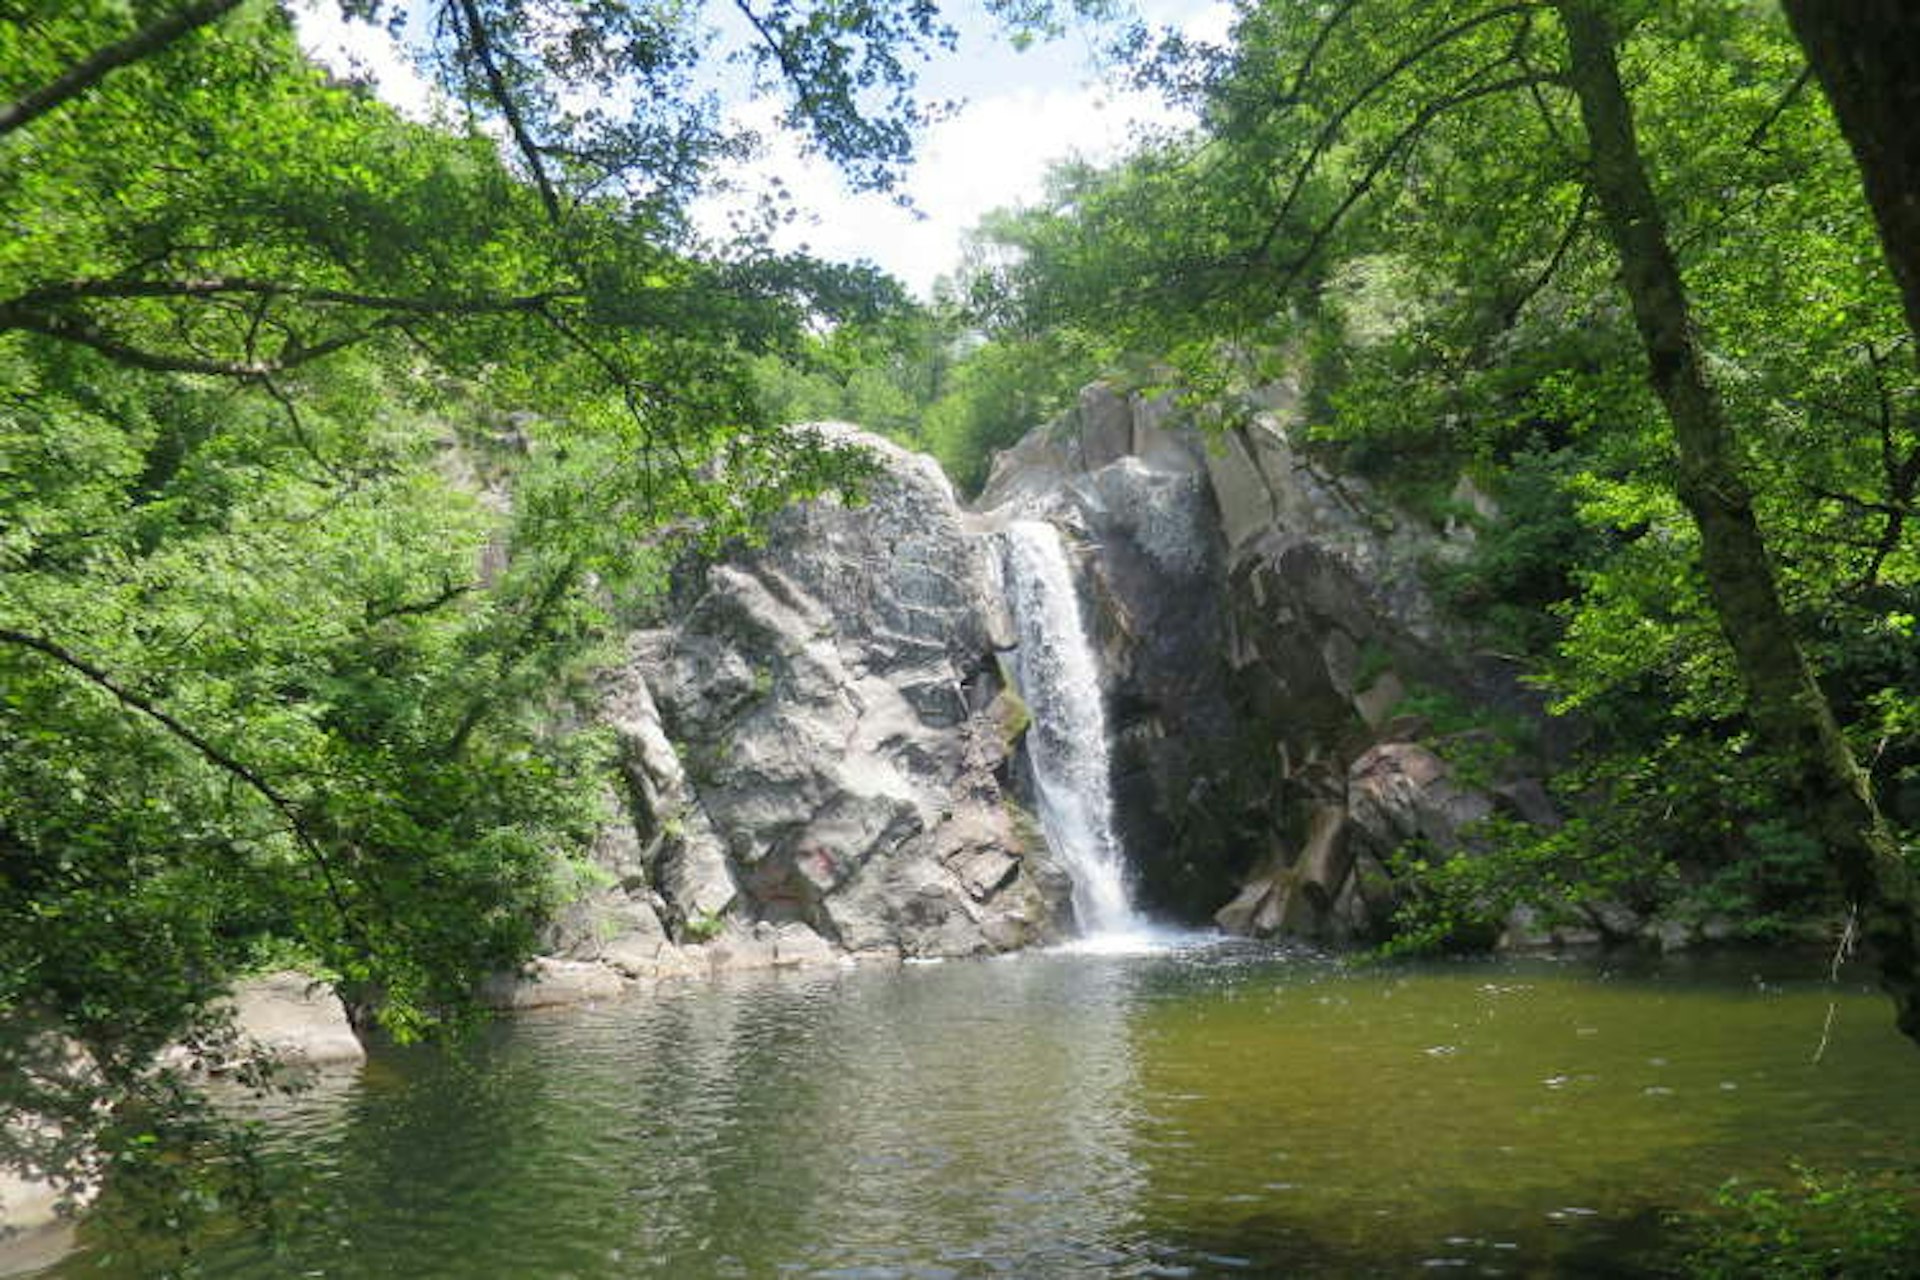 Waterfall of Agia Varvara in Rodopi Mountains National Park, bordered by alder and willow trees. Image by Karyn Noble / Lonely Planet 